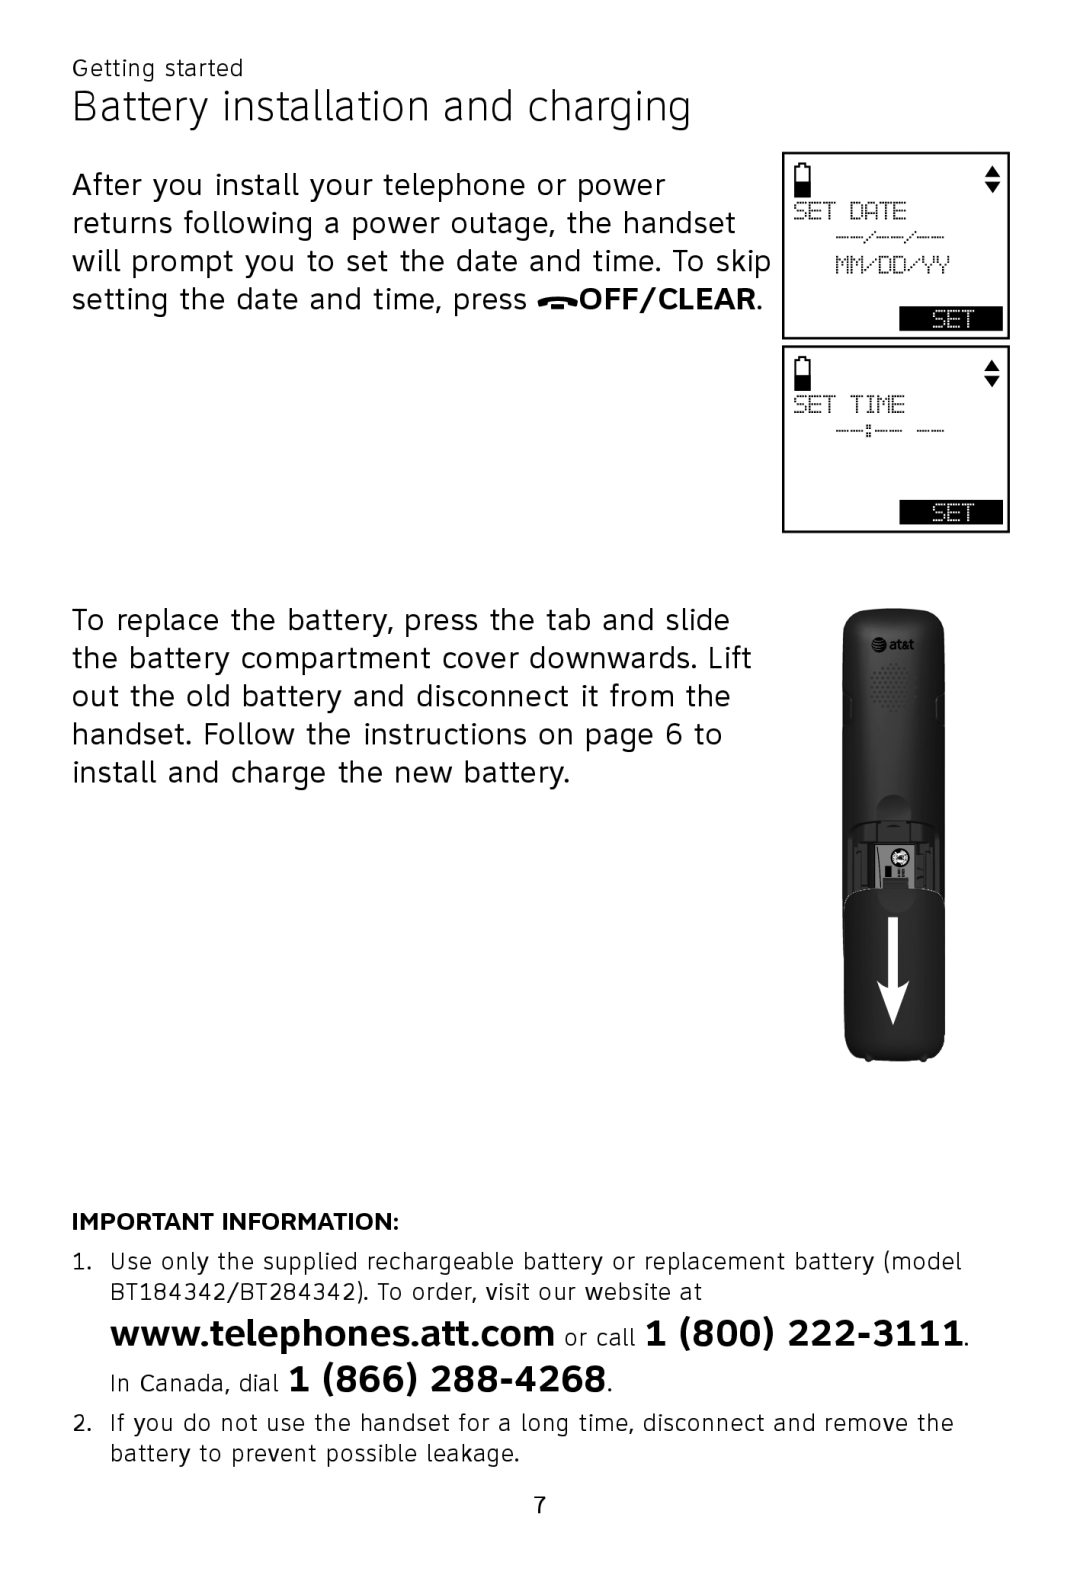 AT&T TL 86009, TL86109, TL86009 user manual Battery installation and charging, Set Date --/--/-- Mm/Dd/Yy, Set Time 